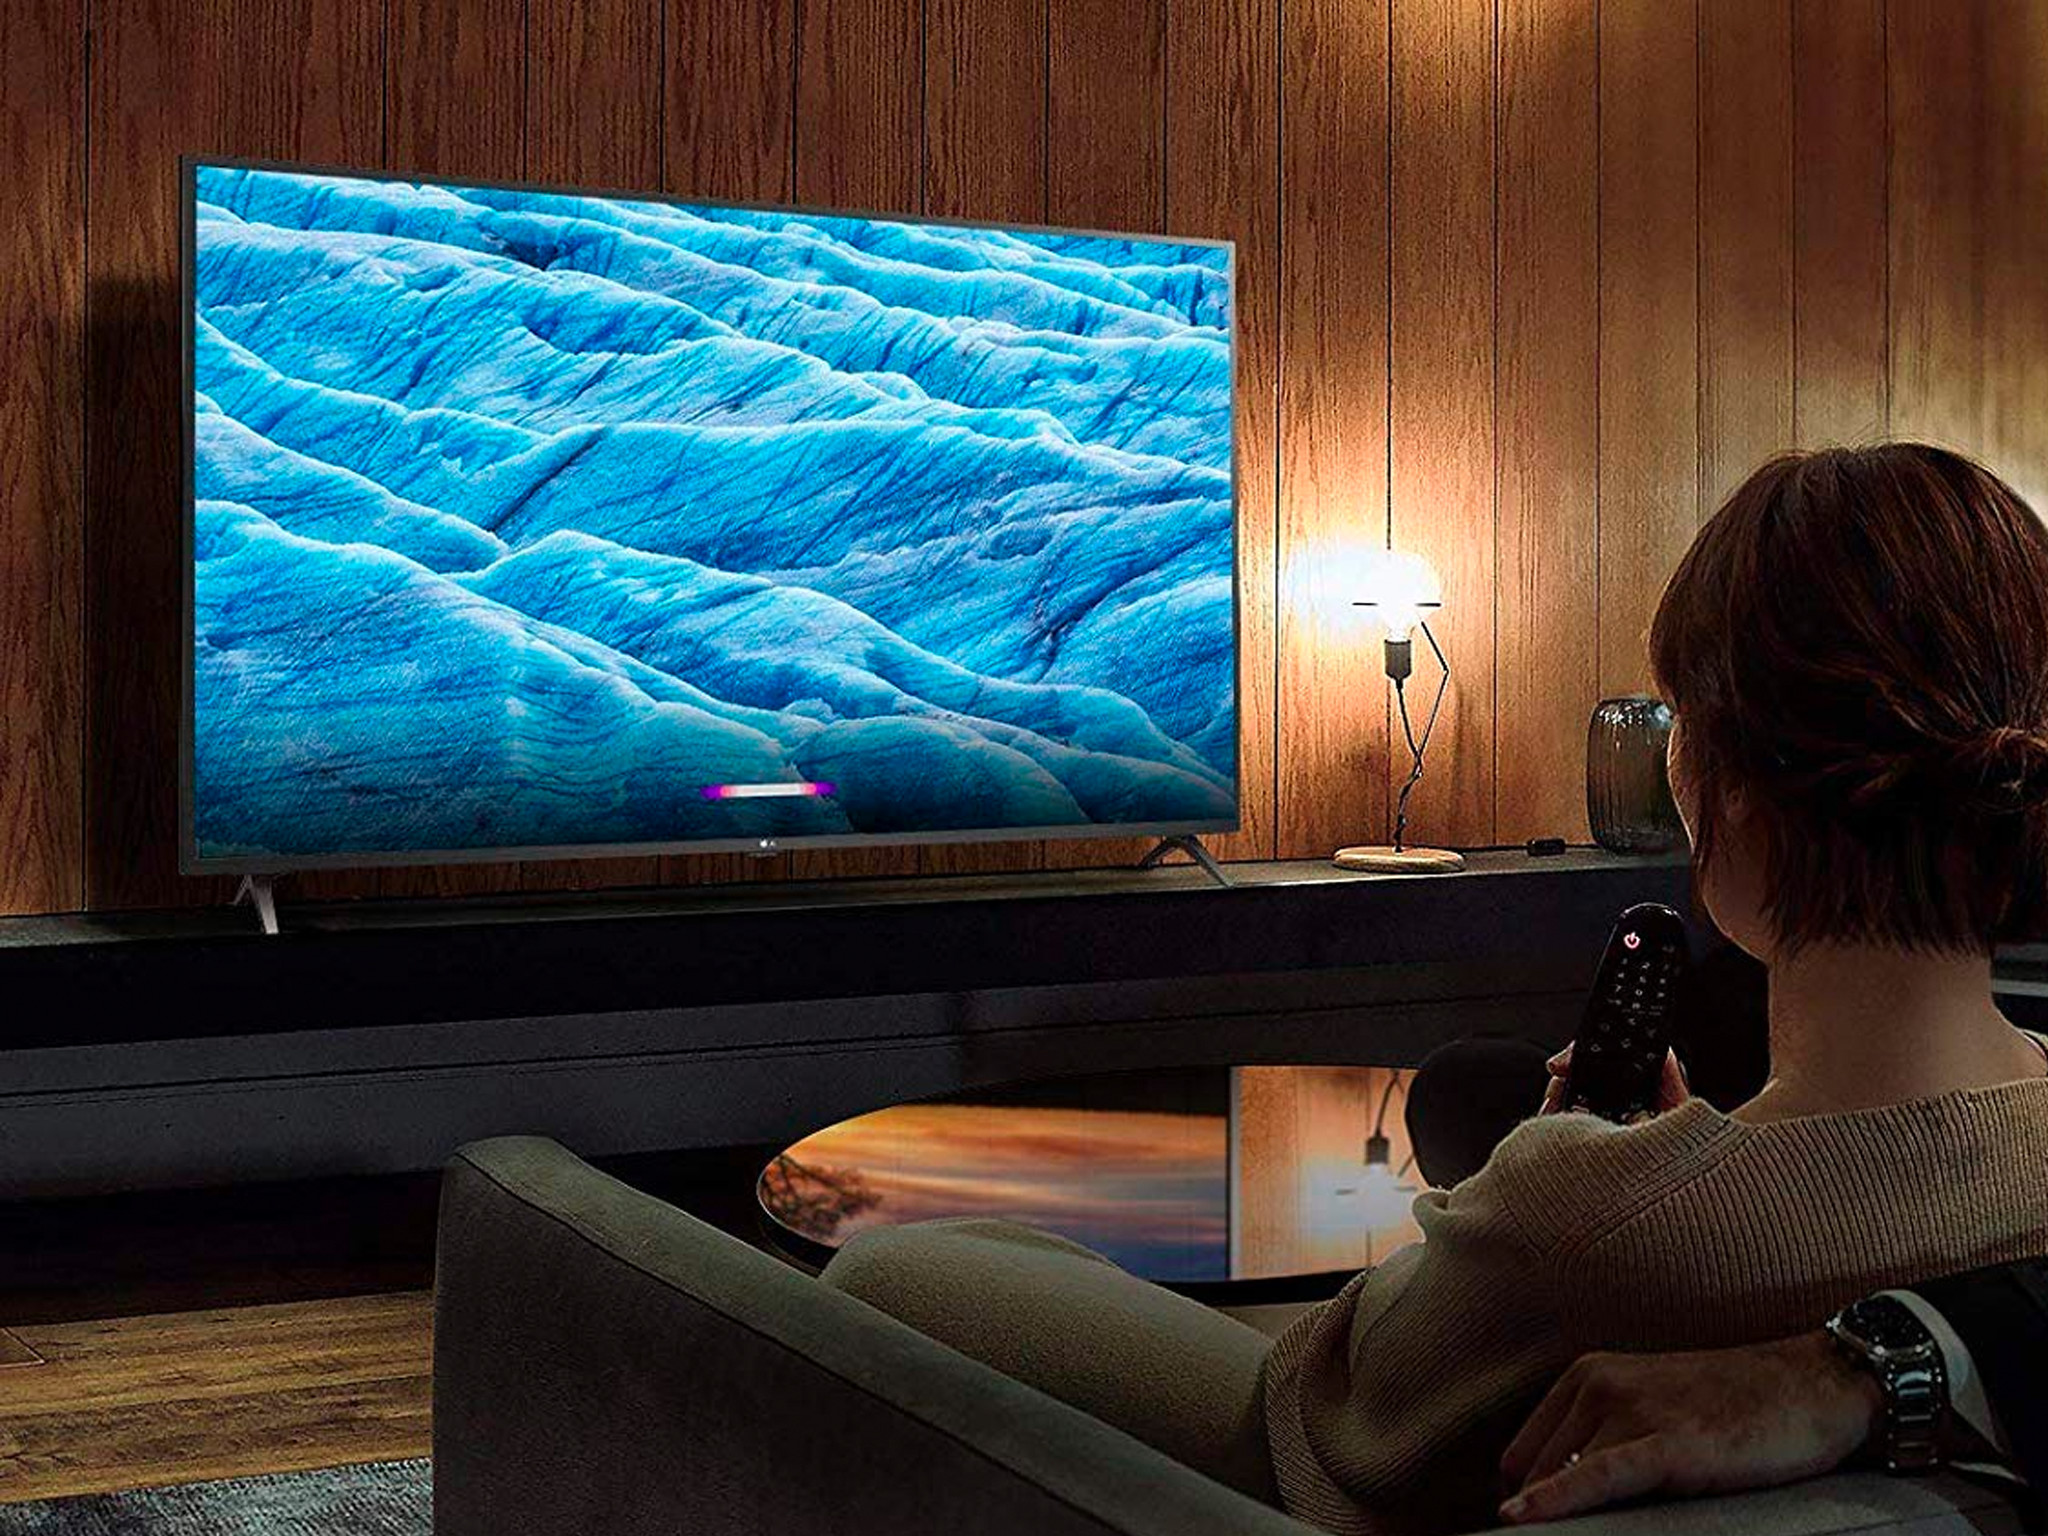 This Black Friday TV deal scores you LG's 55-inch 4K Smart